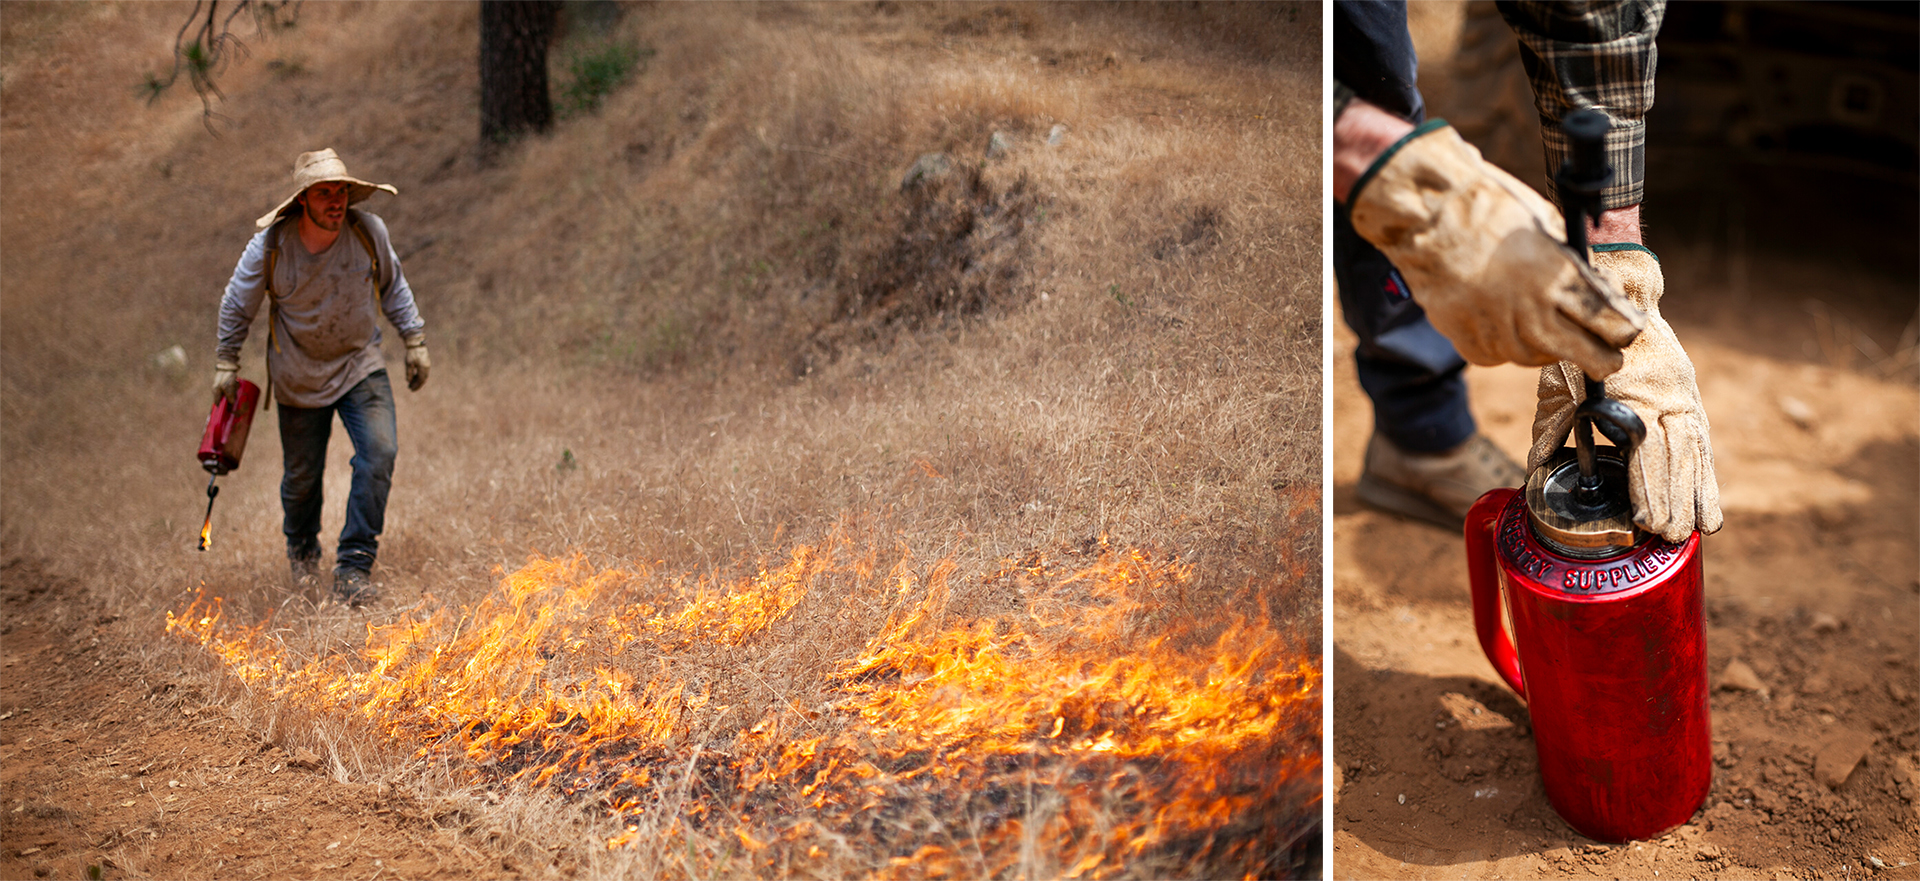 Left: A man walks through dry yellow grasses while using a torch to light the grass on fire.